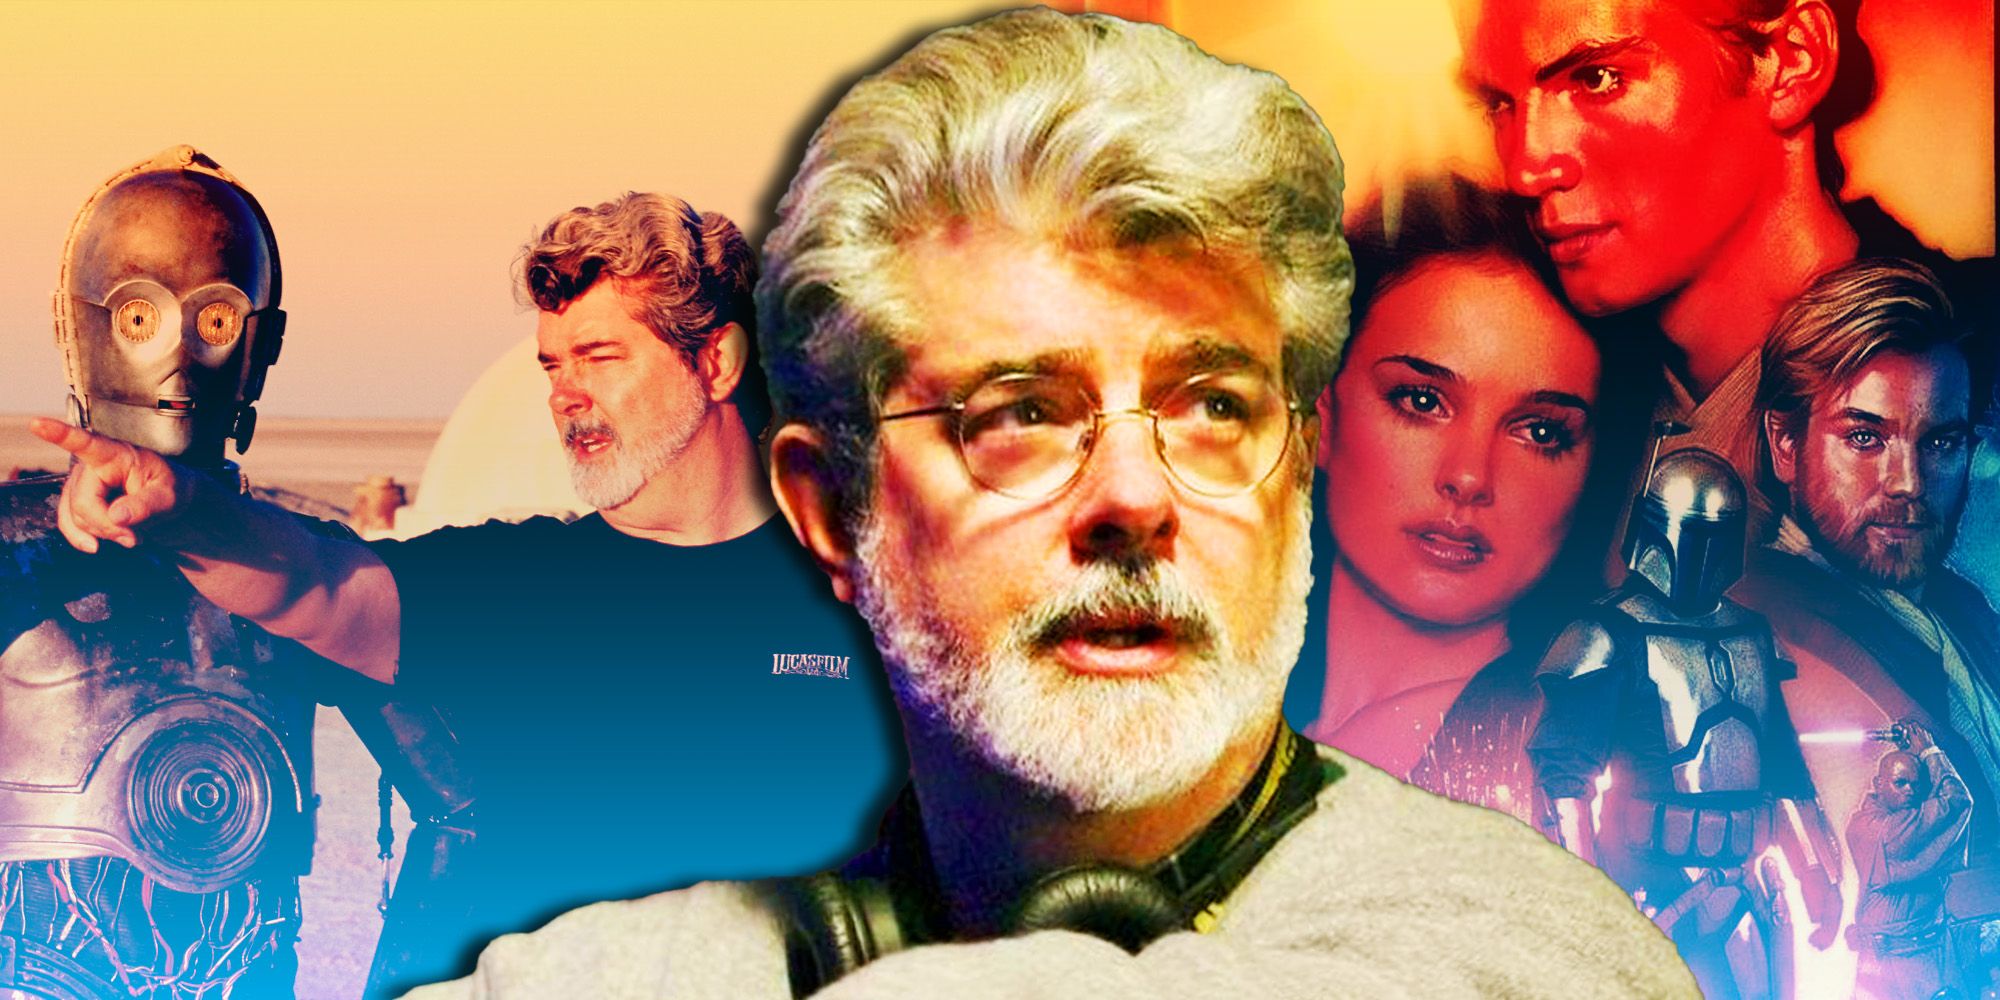 Attack of the Clones set, poster, and George Lucas.